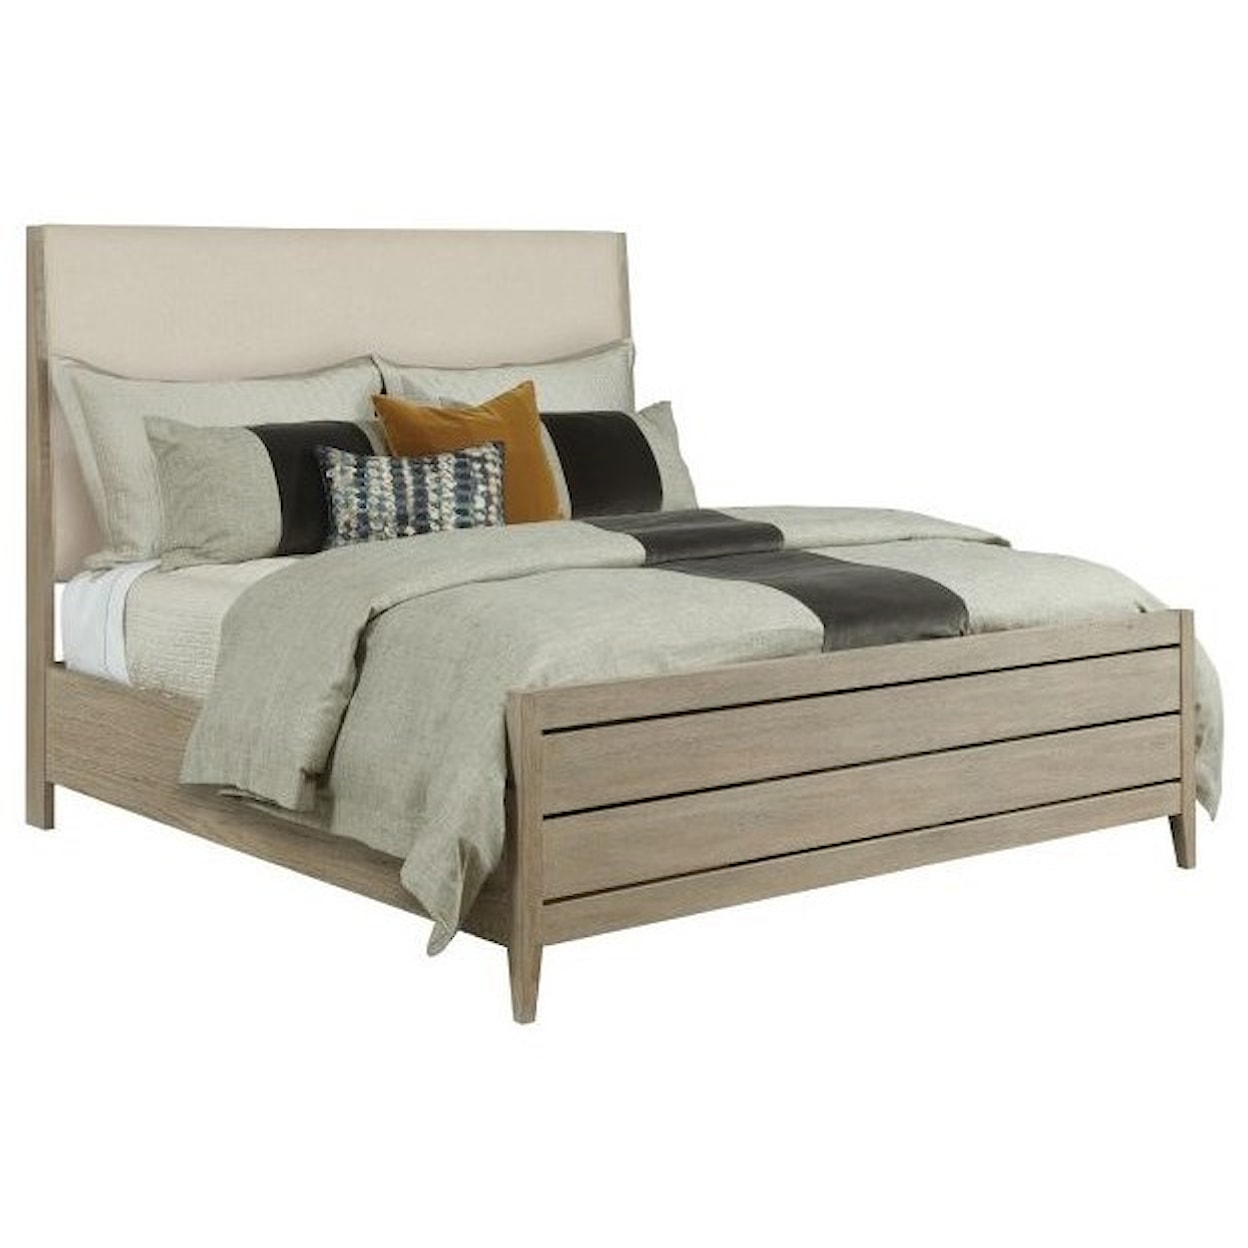 Kincaid Furniture Symmetry Incline California King Upholstered Bed 